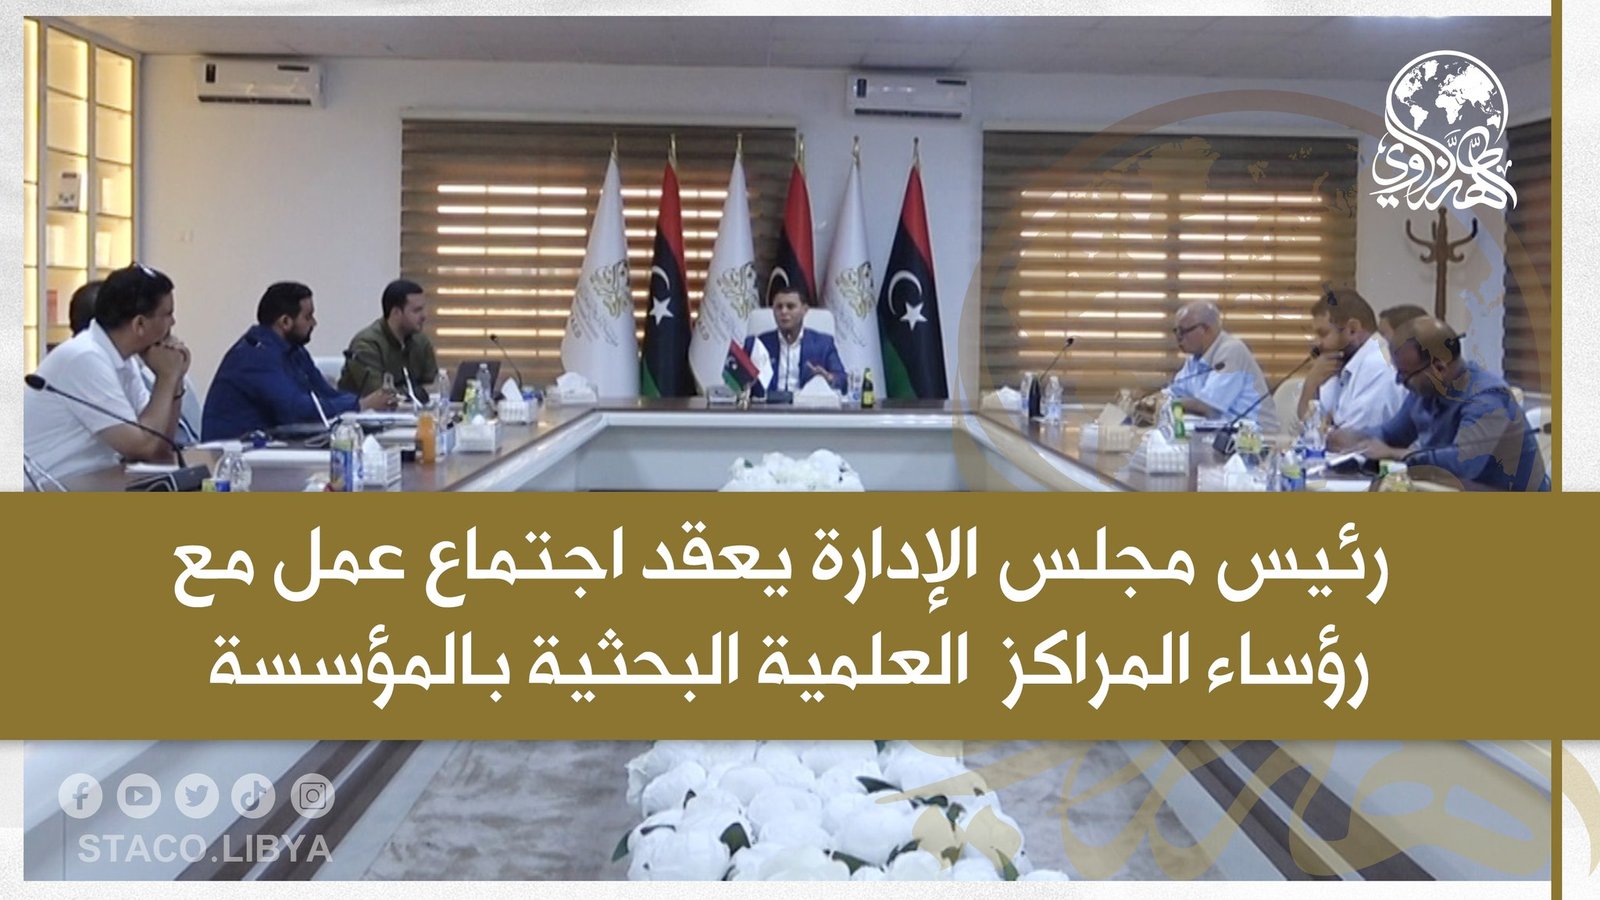 The Chairman of the Board of Directors holds a working meeting with the heads of the Foundation’s scientific research centers.